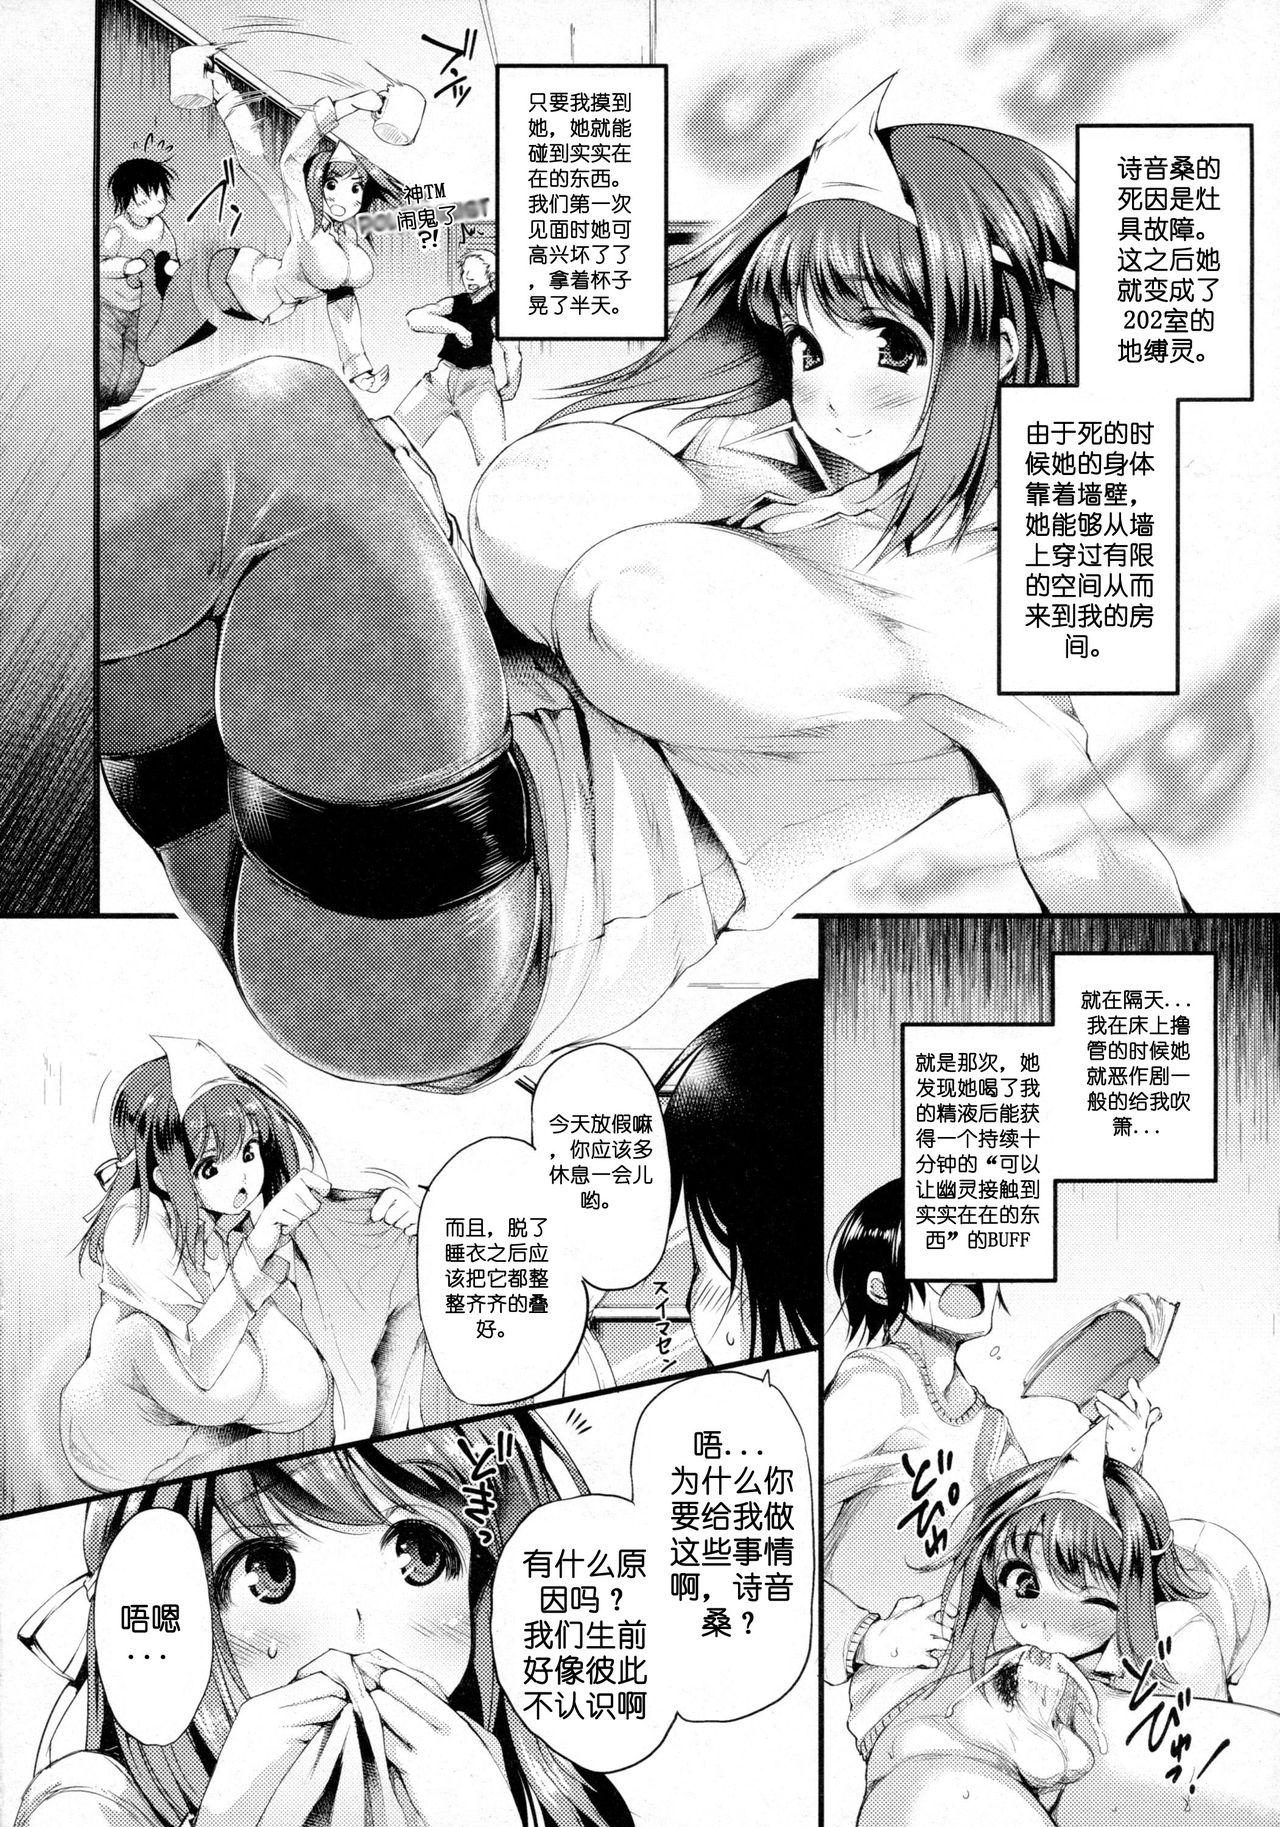 Friends [Oohira Sunset] 202-Goushitsu no Yuurei-san | The Ghost in Room 202 (COMIC Unreal 2016-02 Vol. 59) [Chinese] [简称天子个人汉化] (Ongoing) Gozando - Page 2